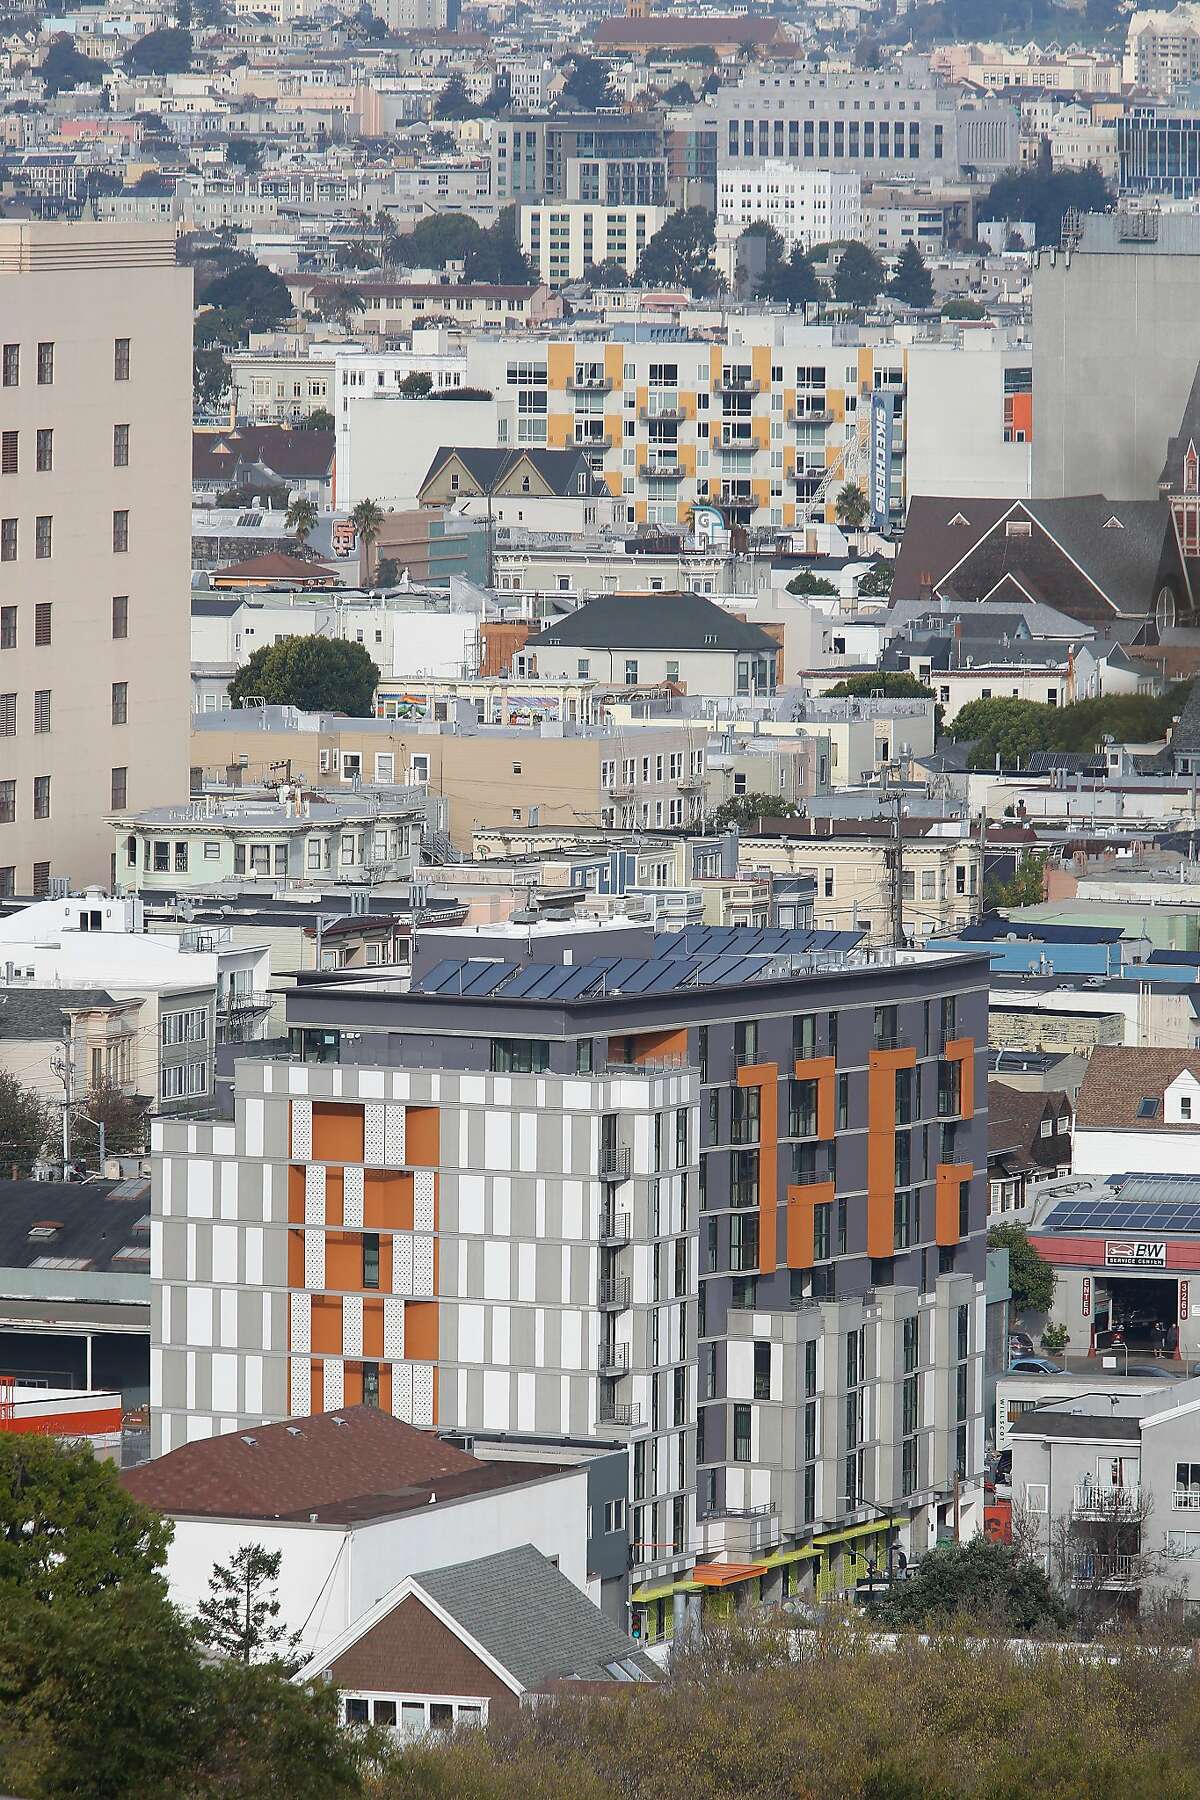 1296 Shotwell (center foreground) is seen on Tuesday, December 17, 2019 in San Francisco, Calif.